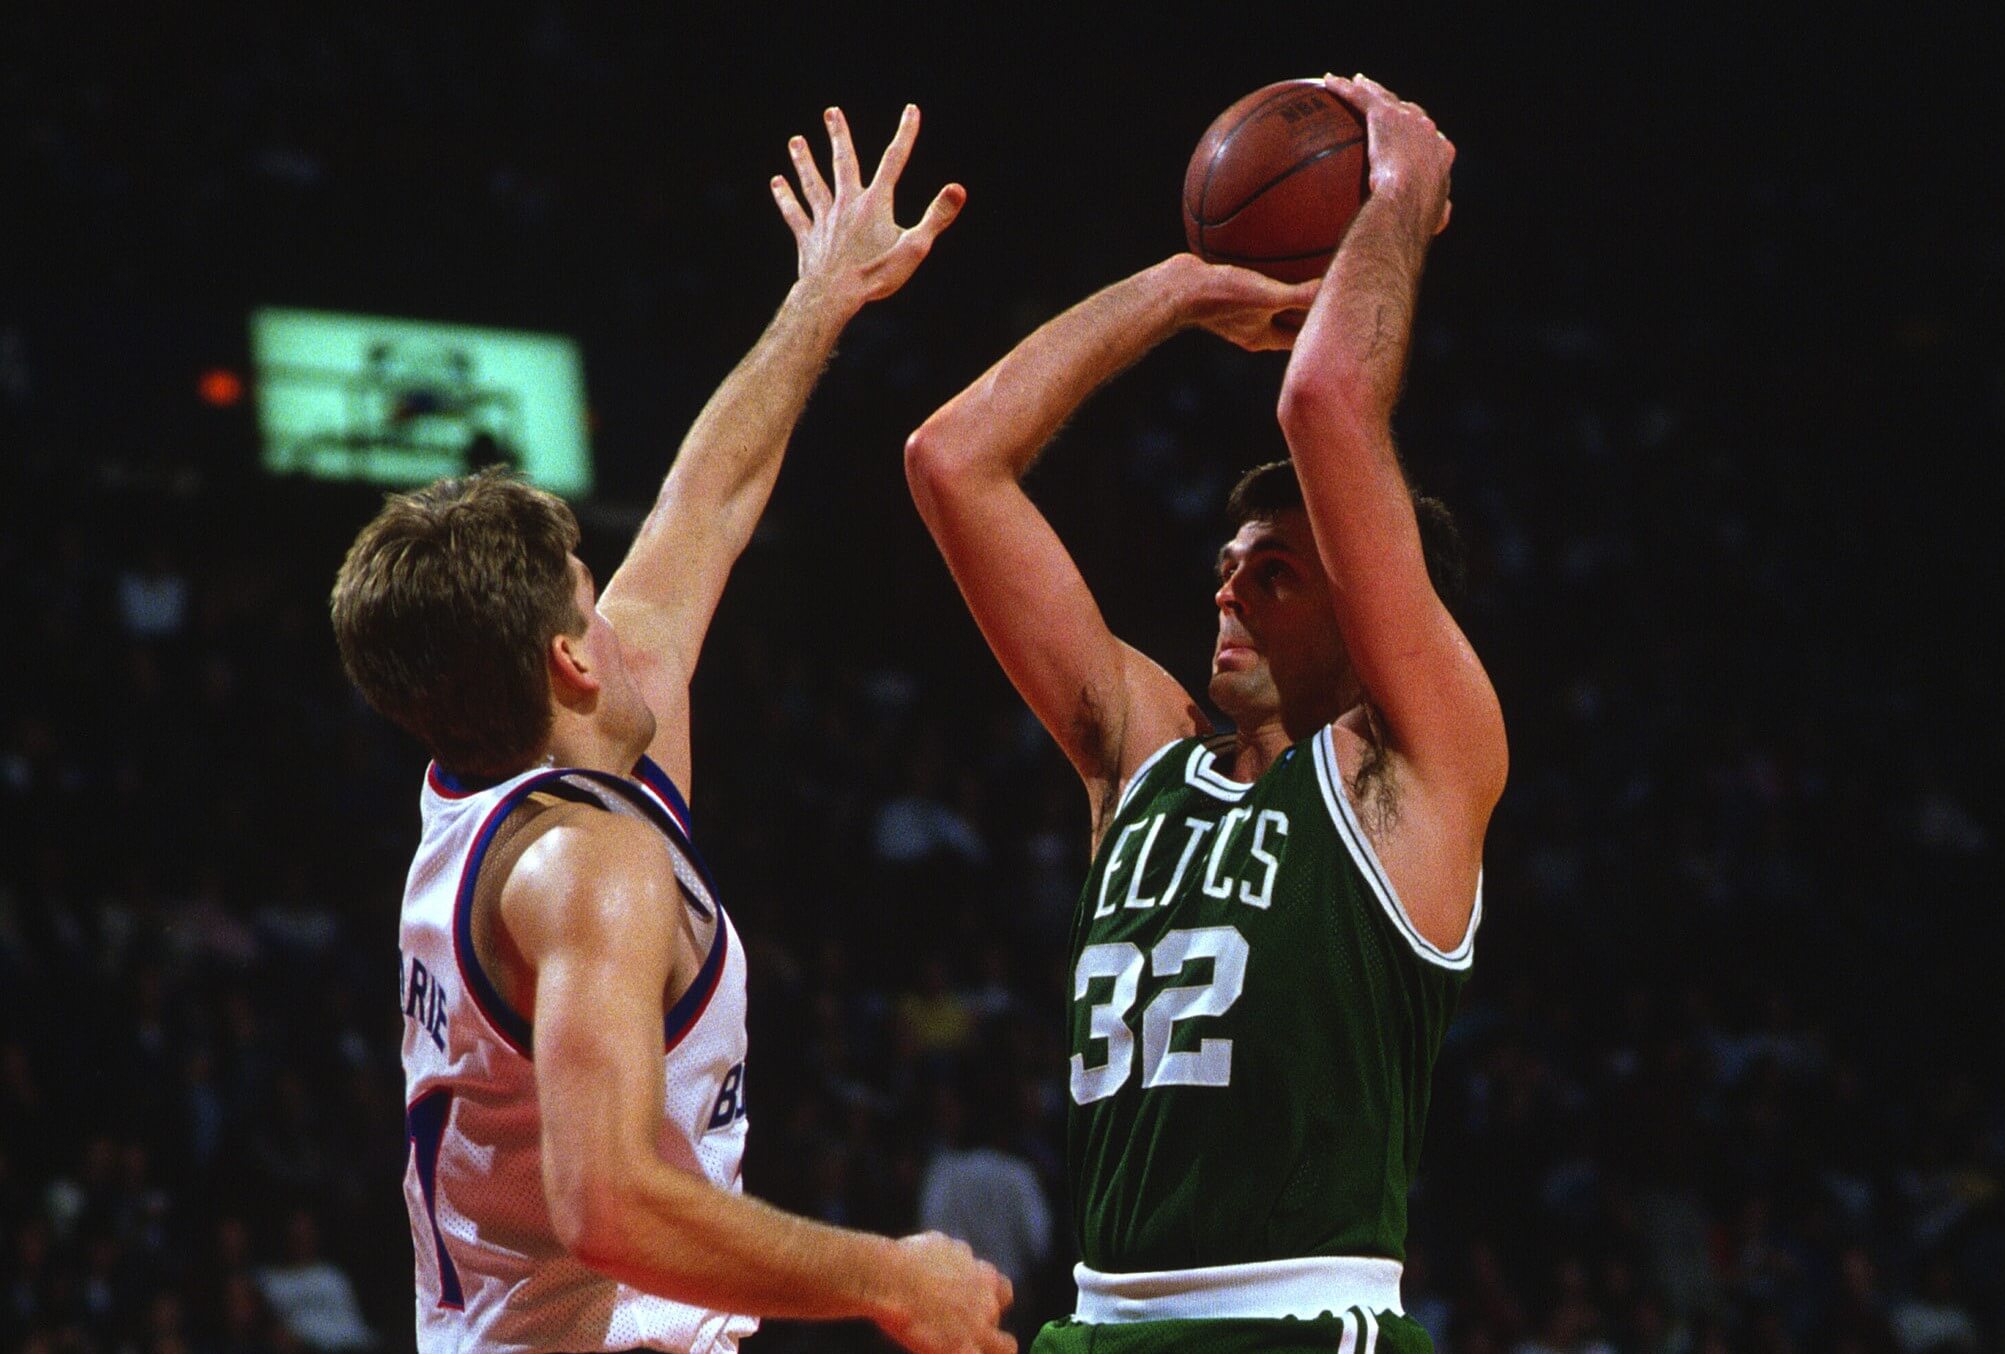 Kevin McHale of the Boston Celtics shoots over Mark Alarie of the Washington Bullets.